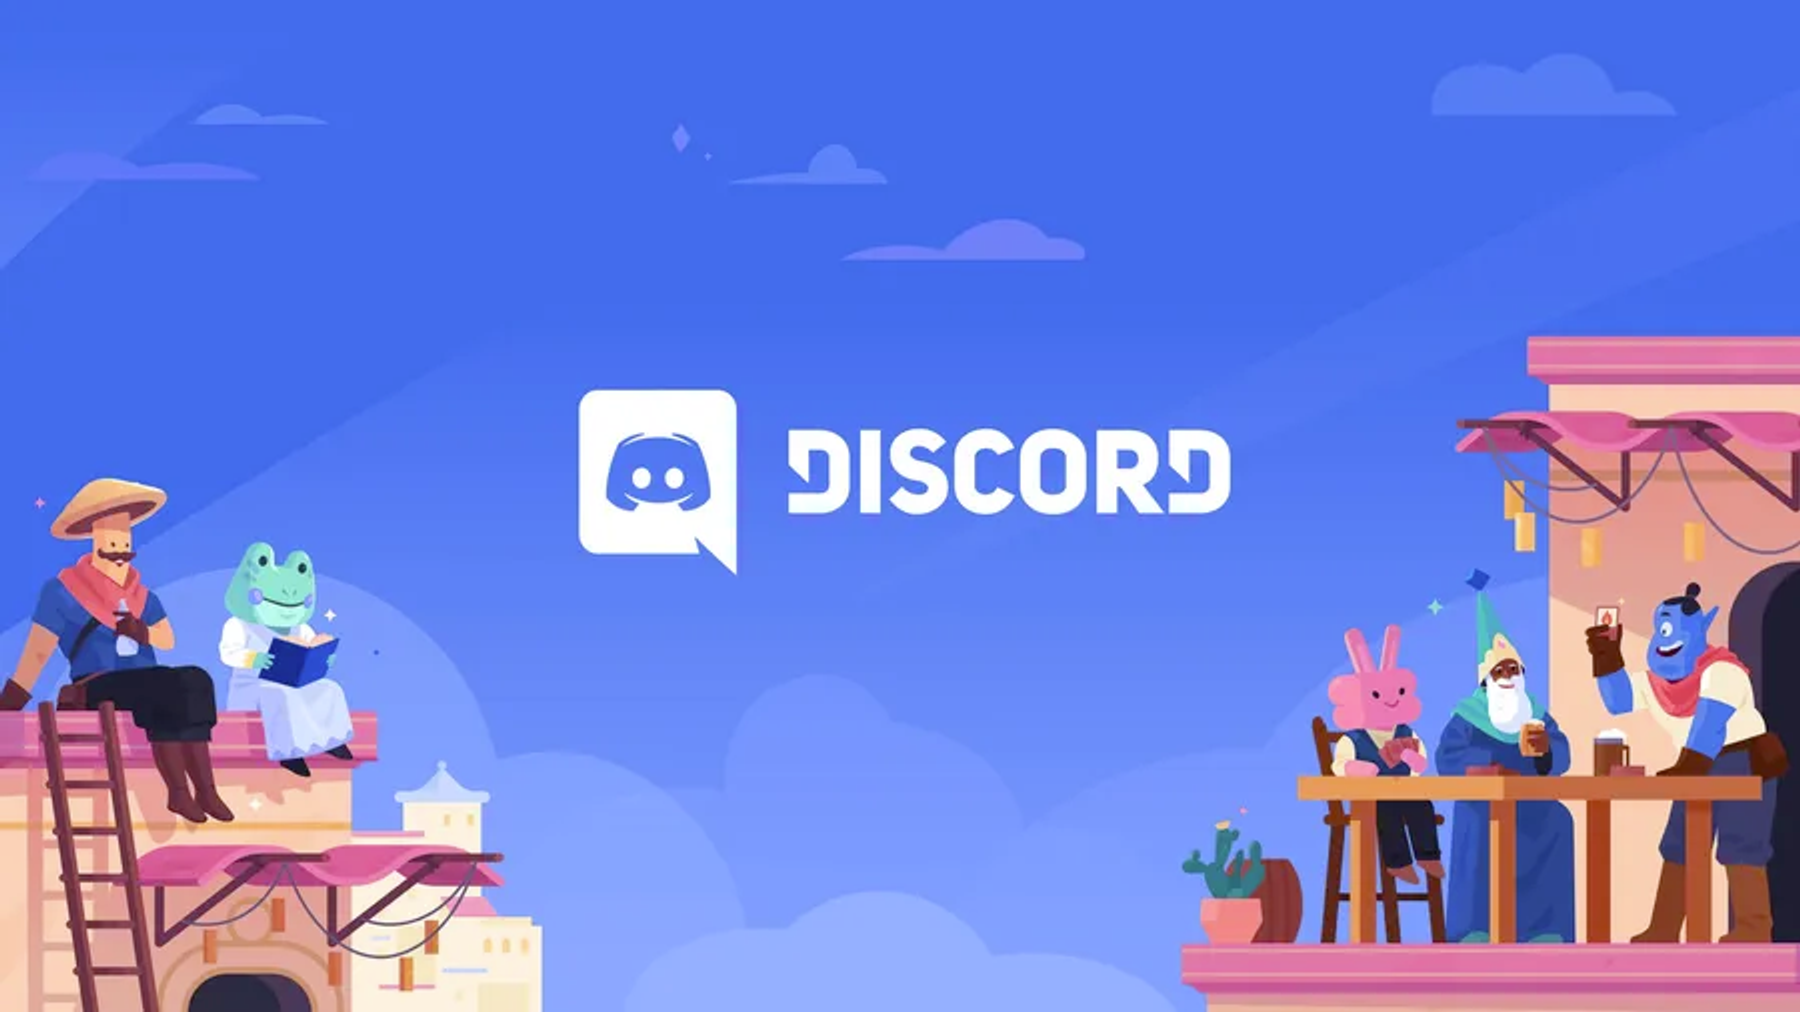 Discord need in you community